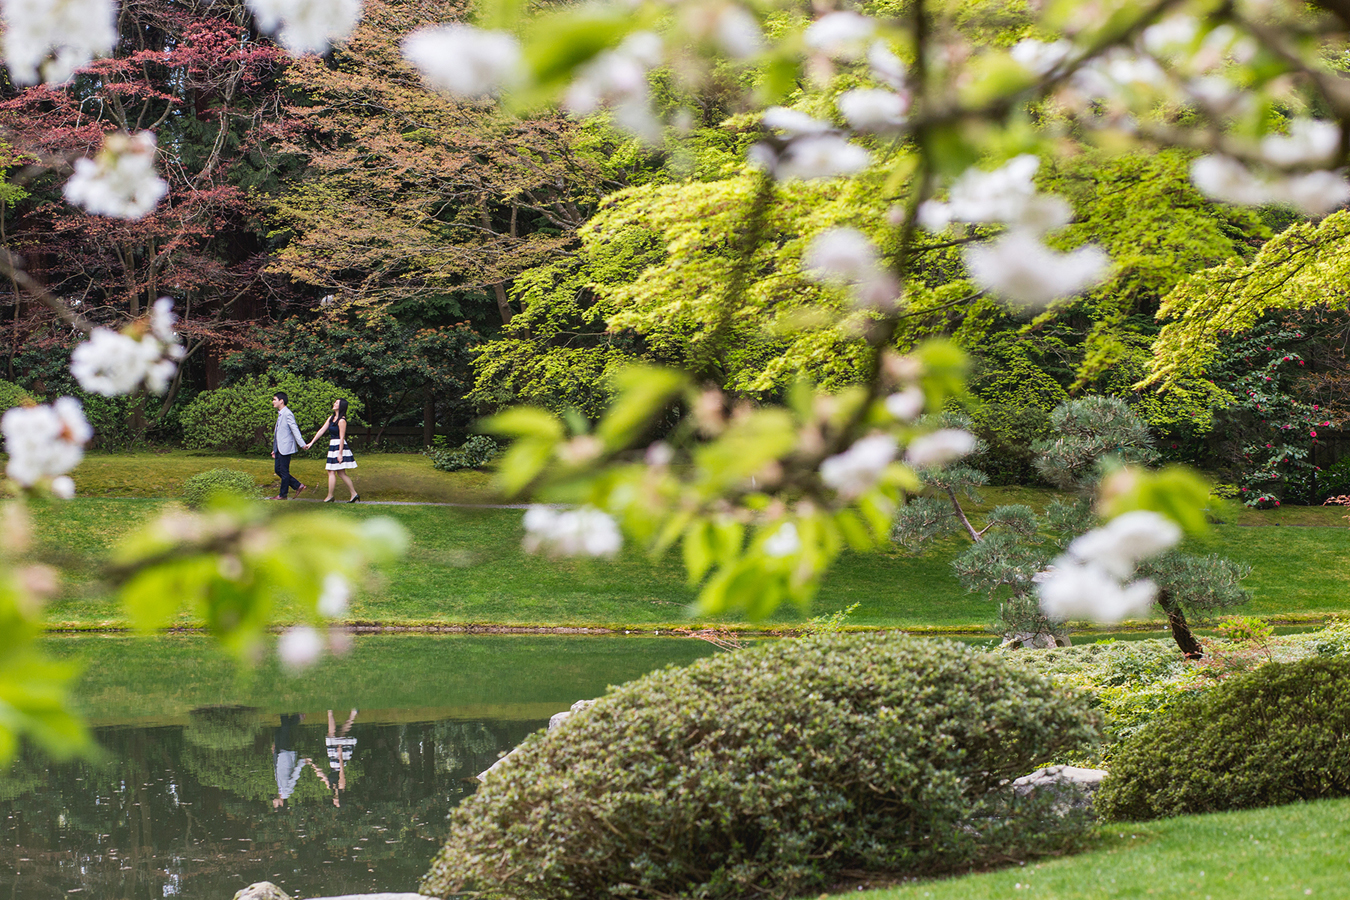 A romantic engagement session at Nitobe Gardens at UBC, followed by a picnic at Wreck Beach, shot by award winning Vancouver wedding photographers Love Tree Photography